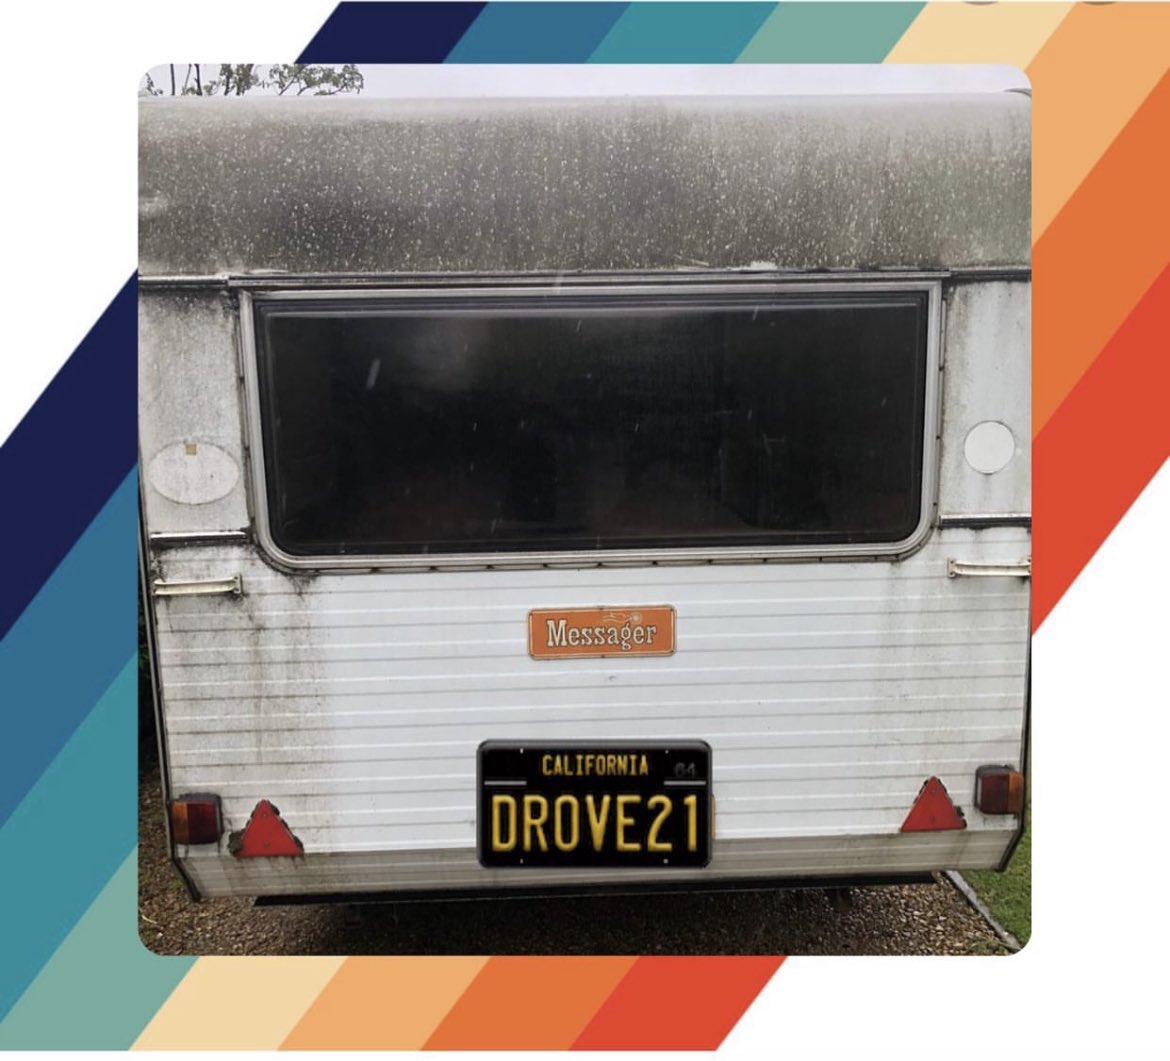 Being parked next to a busy road for the last 6 years has certainly taken its toll on the paint work. #newpaintjobcomingsoon #70sstyle #bohocaravan #bohodecor #bohemianlikeyou #upcycledfurniture #upcycling #1970scaravan #frenchcaravan #caravanrenovation #retrovibes